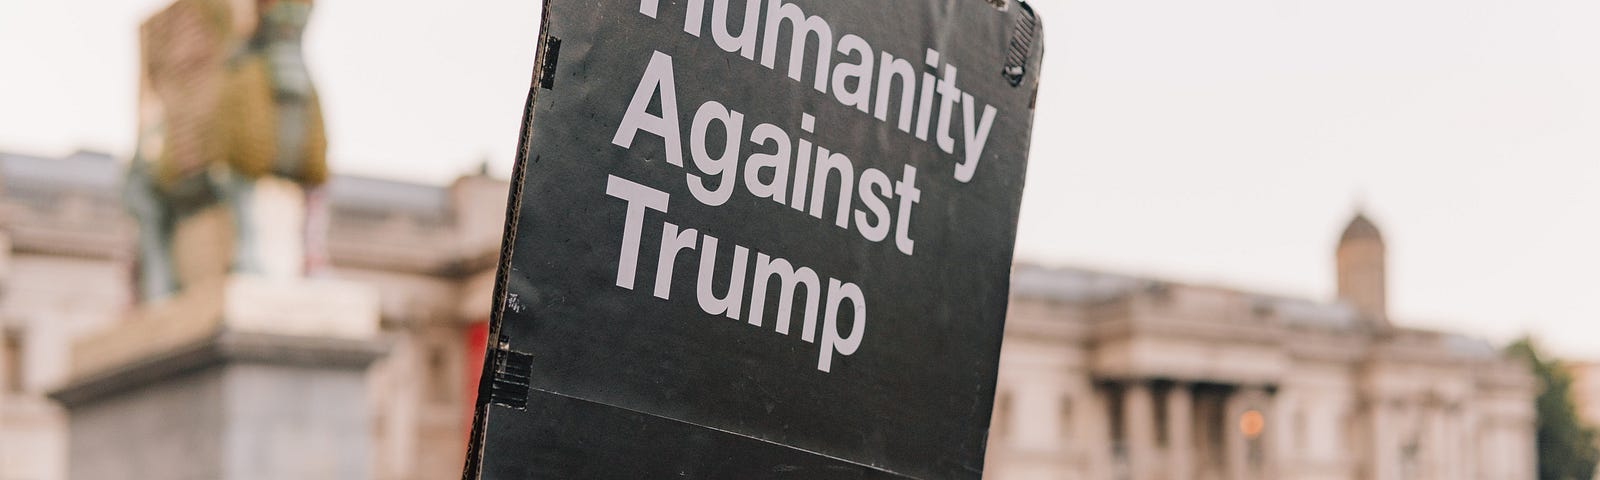 Sign that says “Humanity Against Trump.”